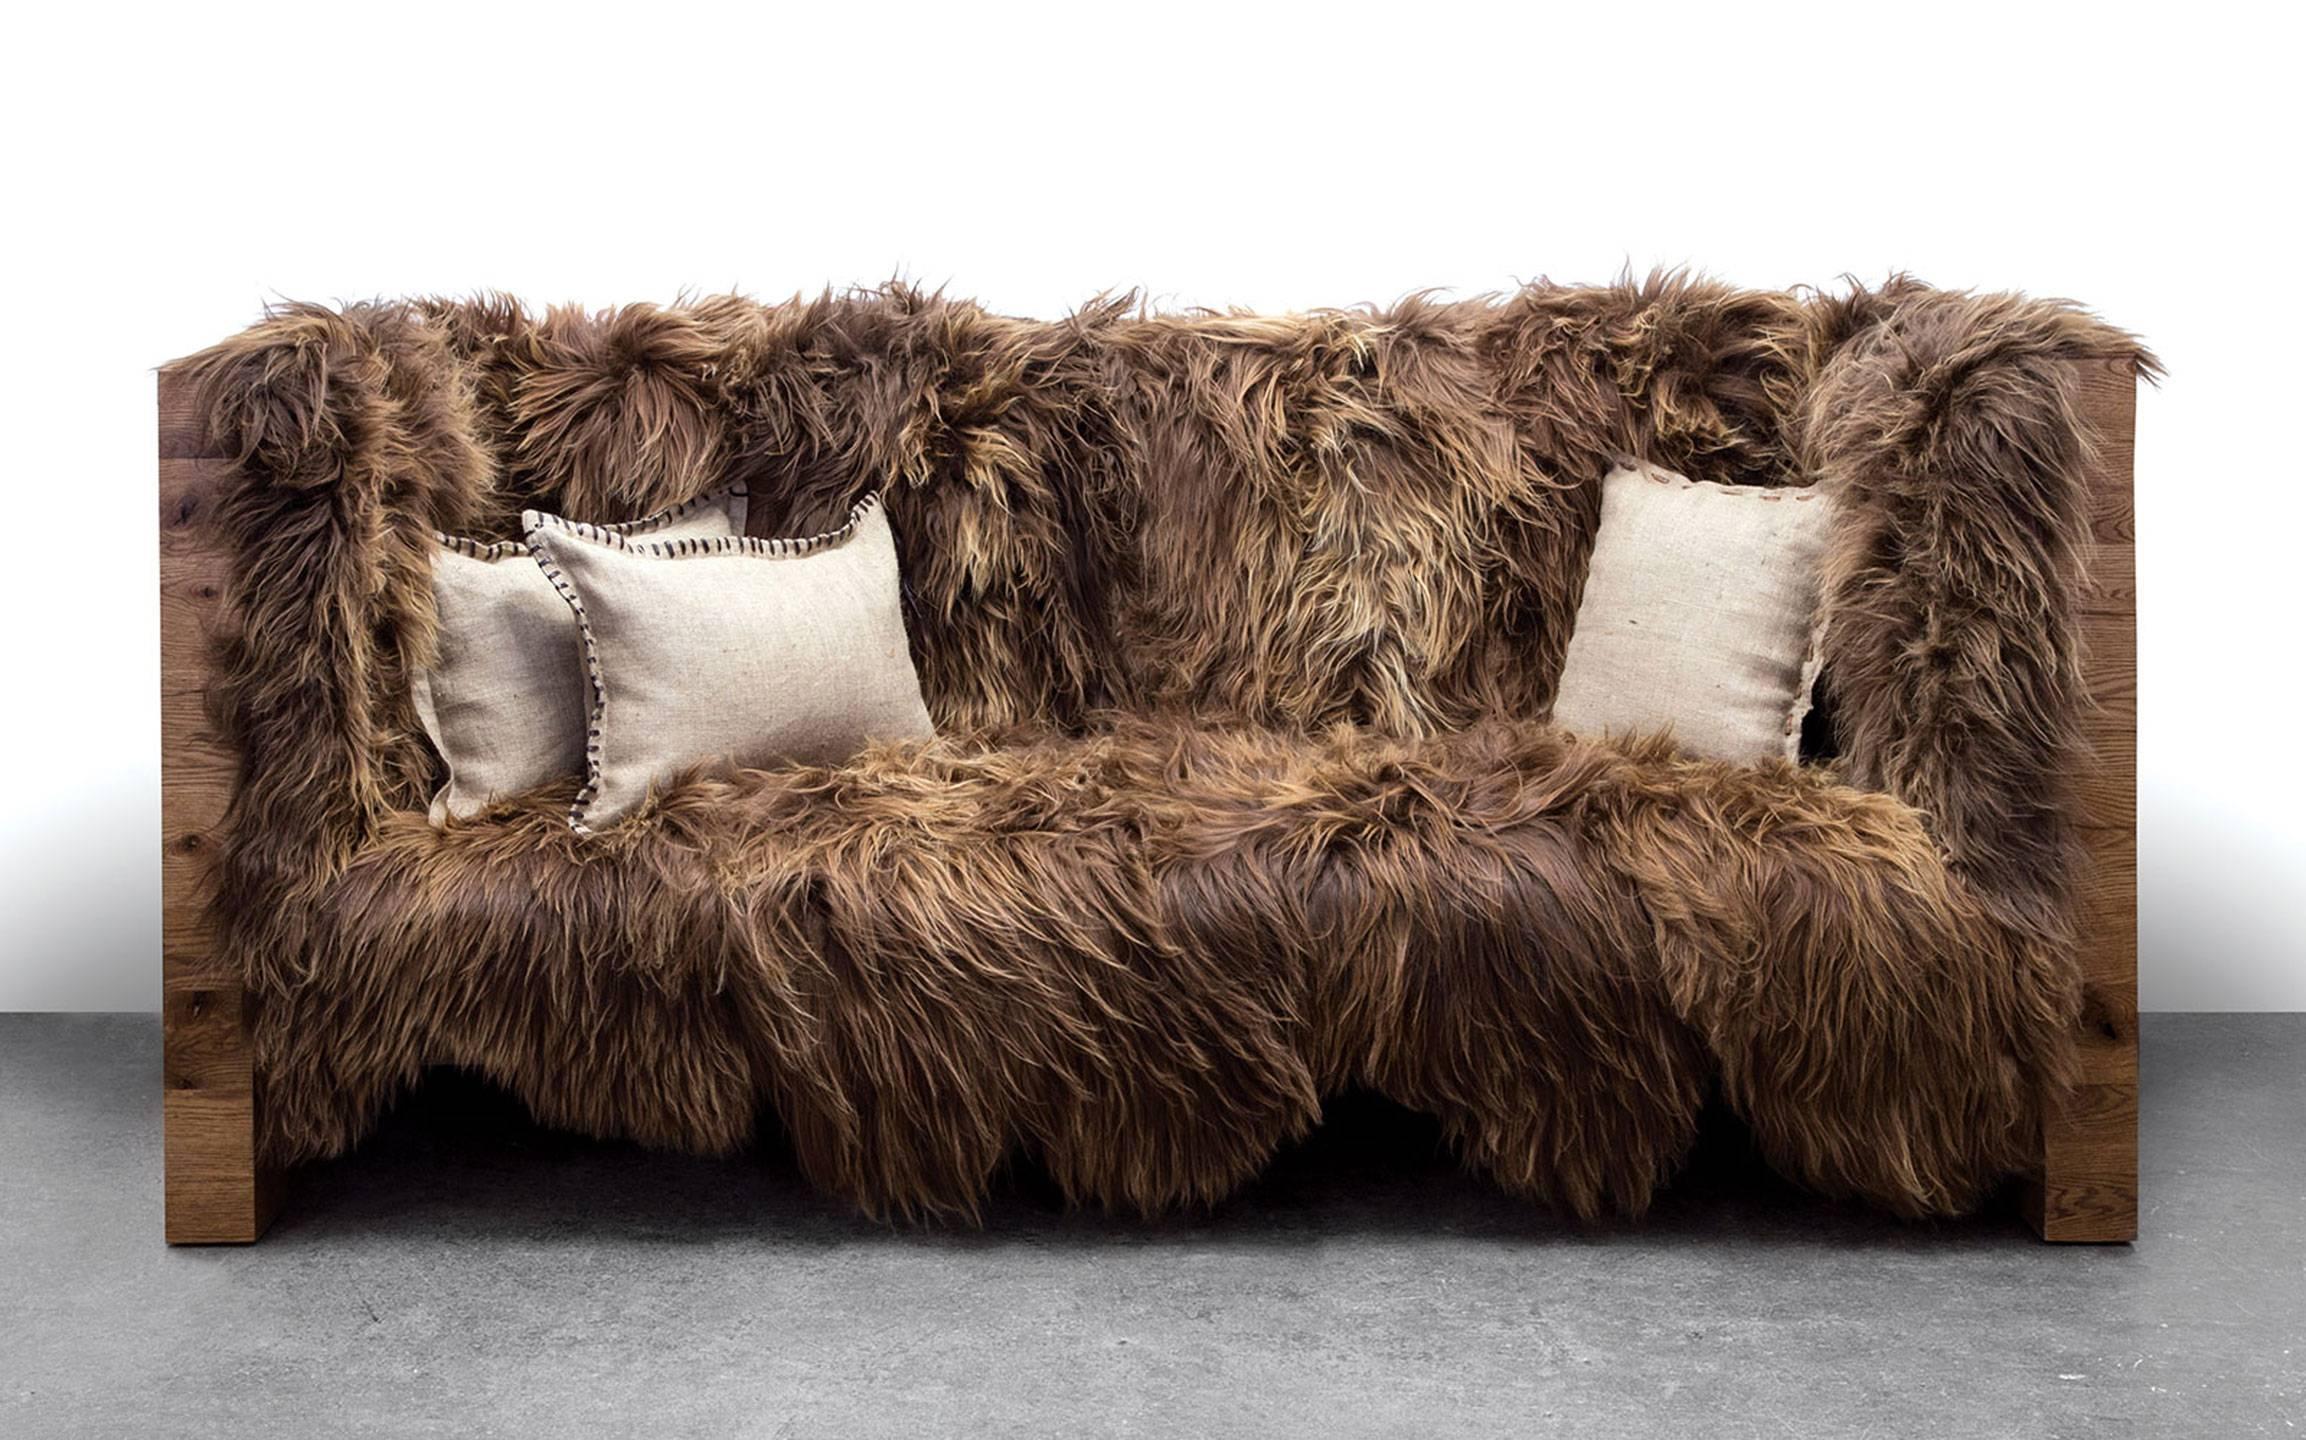 Oh no, this furry creation is not made from Chewbacca or a woolly mammoth, it's actually wool from the Icelandic sheep brought to Iceland by the Vikings. Icelandic sheep have been bred for a thousand years in a very harsh environment making the wool